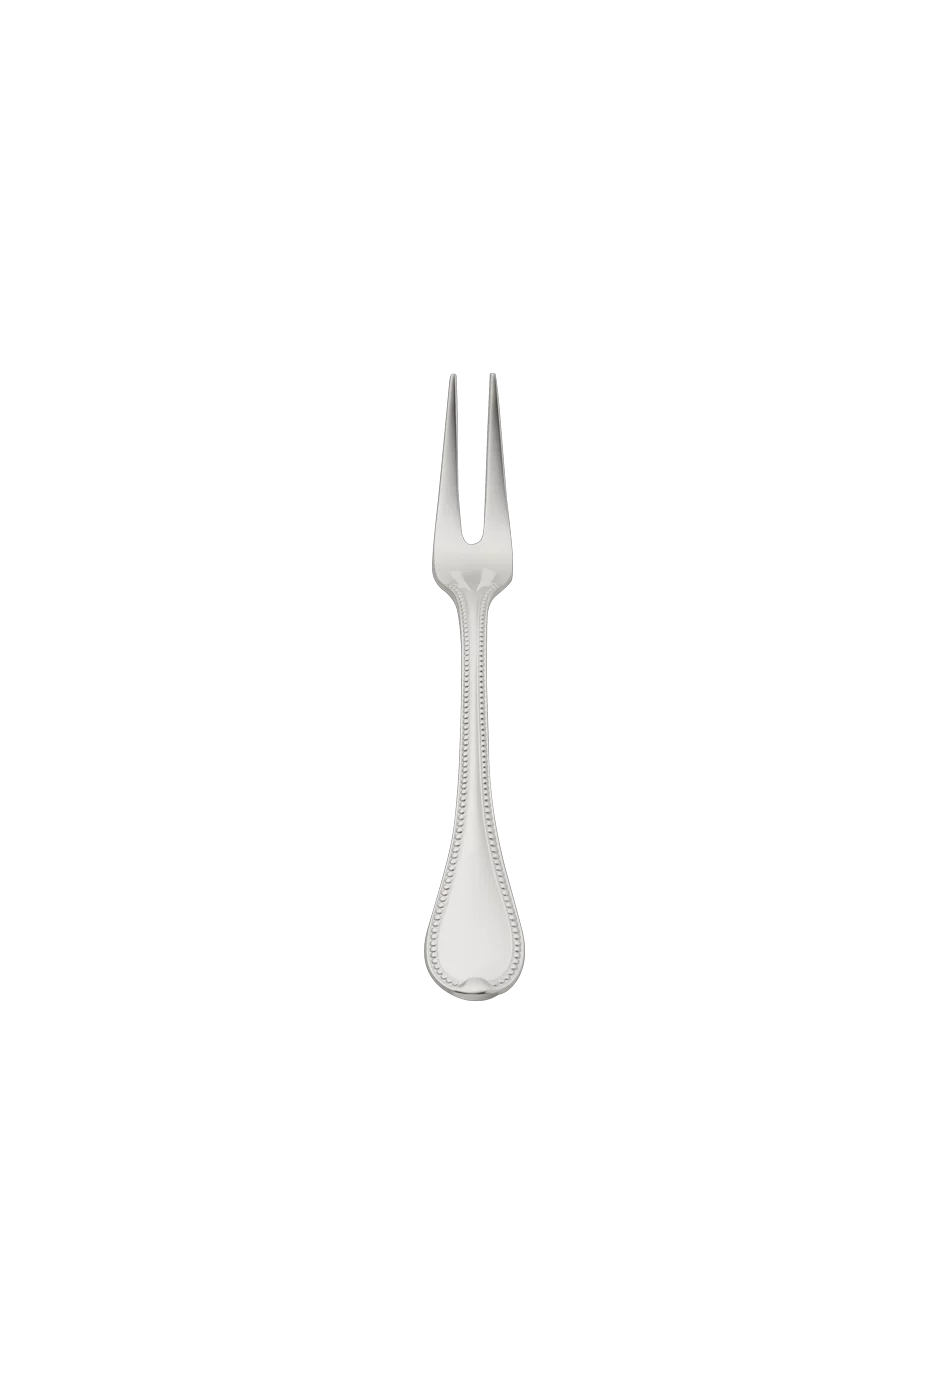 Französisch-Perl Meat Fork, small (150g massive silverplated)